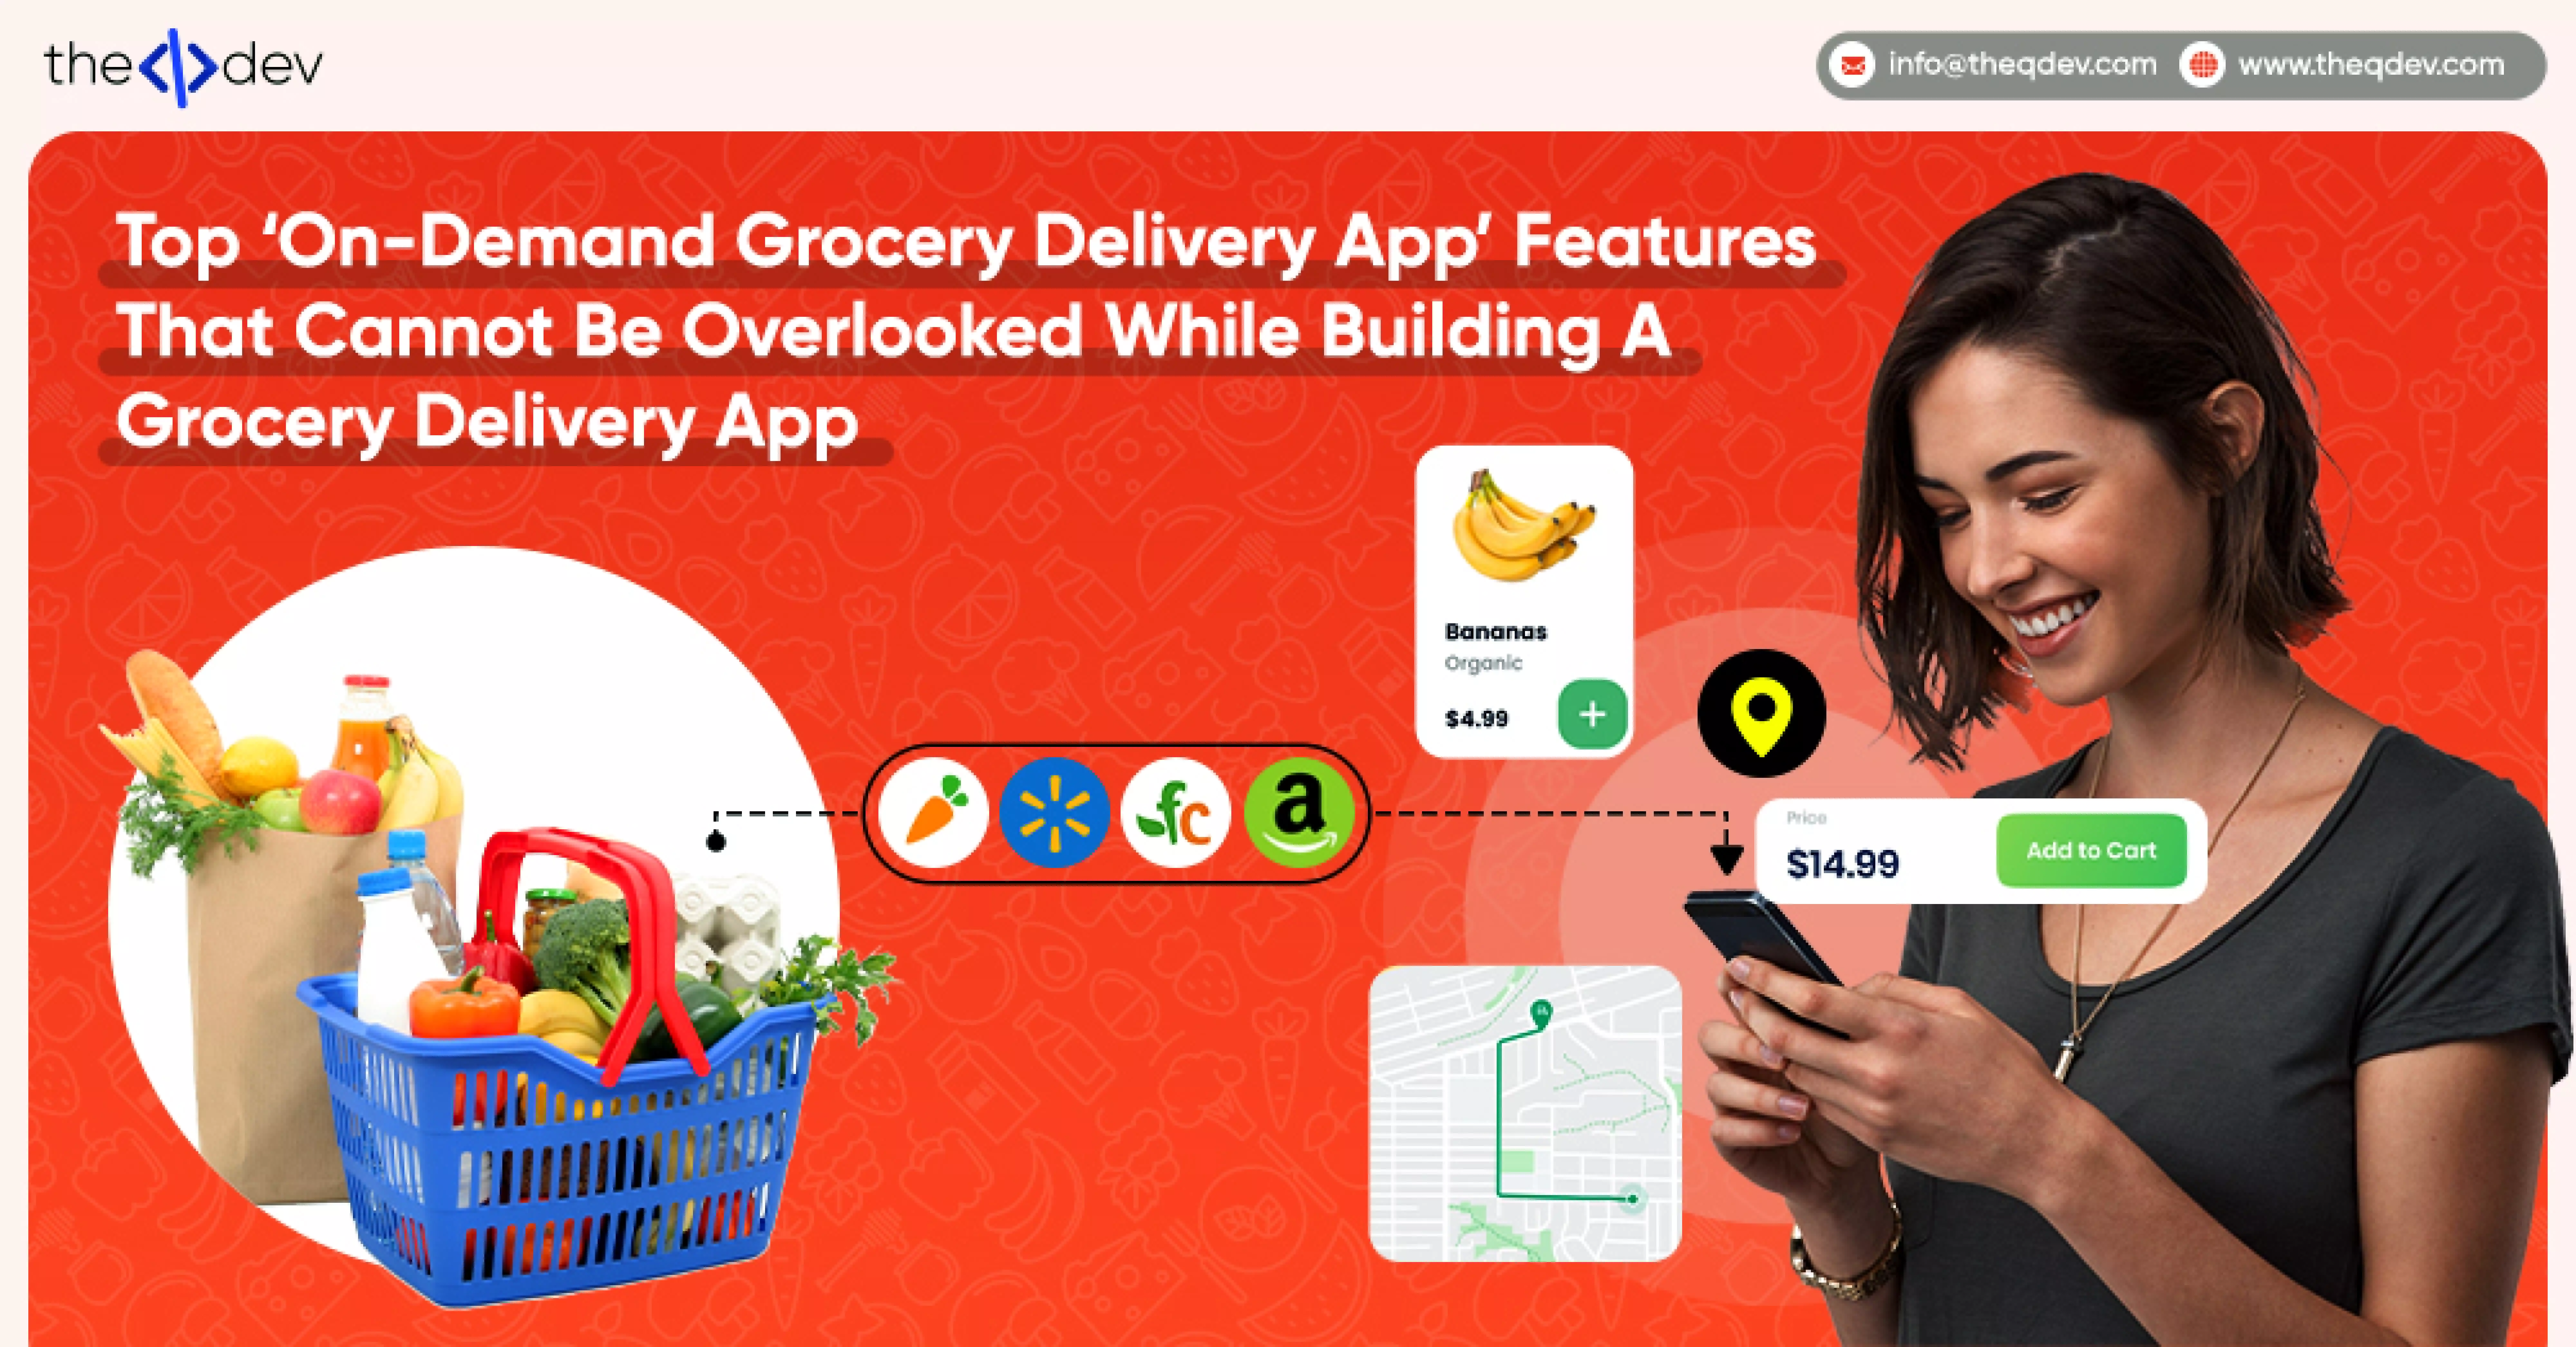 Top ‘On-Demand Grocery Delivery App’ Features That Cannot Be Overlooked